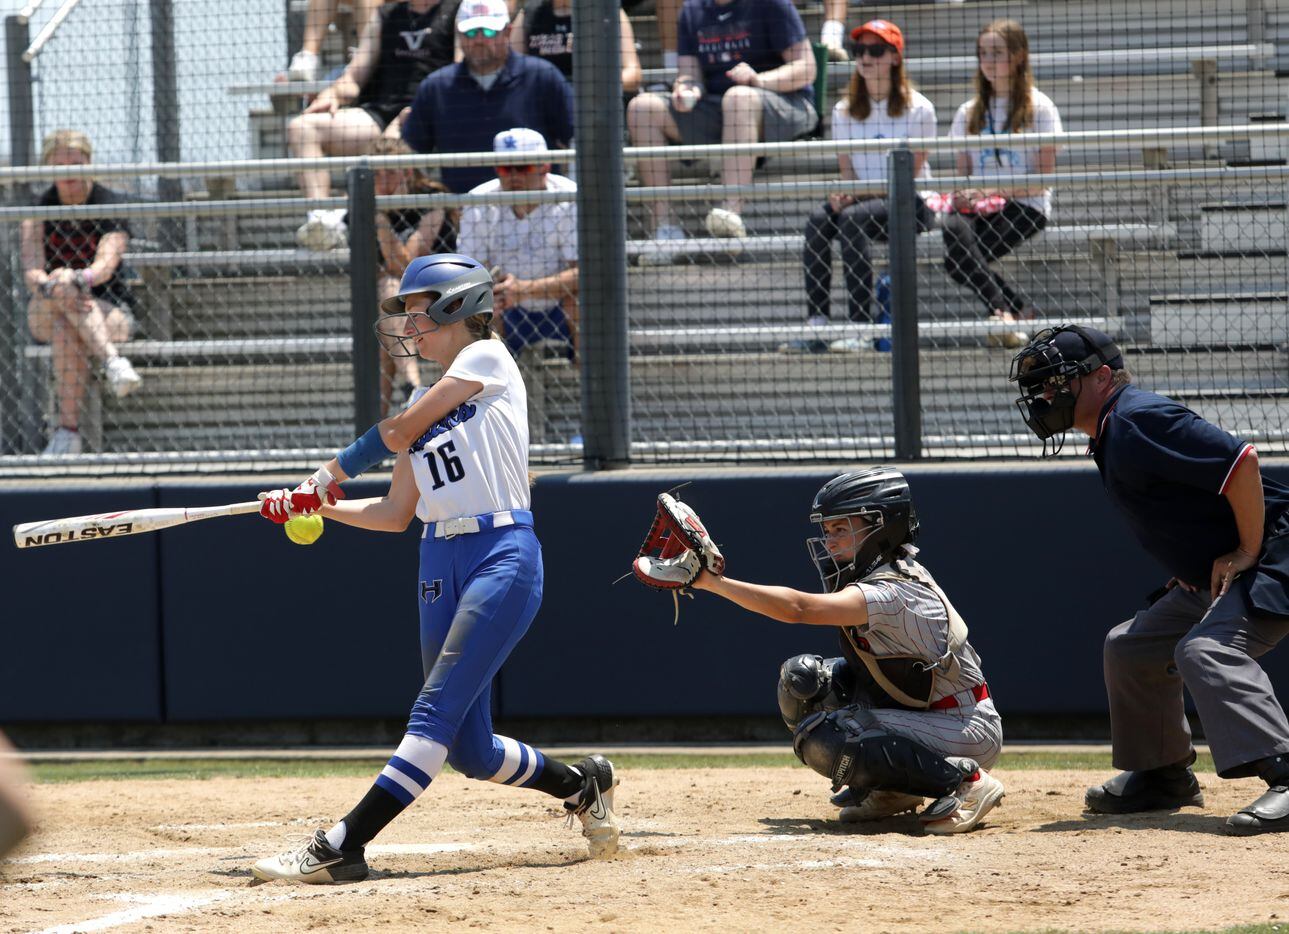 Hebron High School player #16, Ashley Vaccaro, swings and misses during a softball playoff...